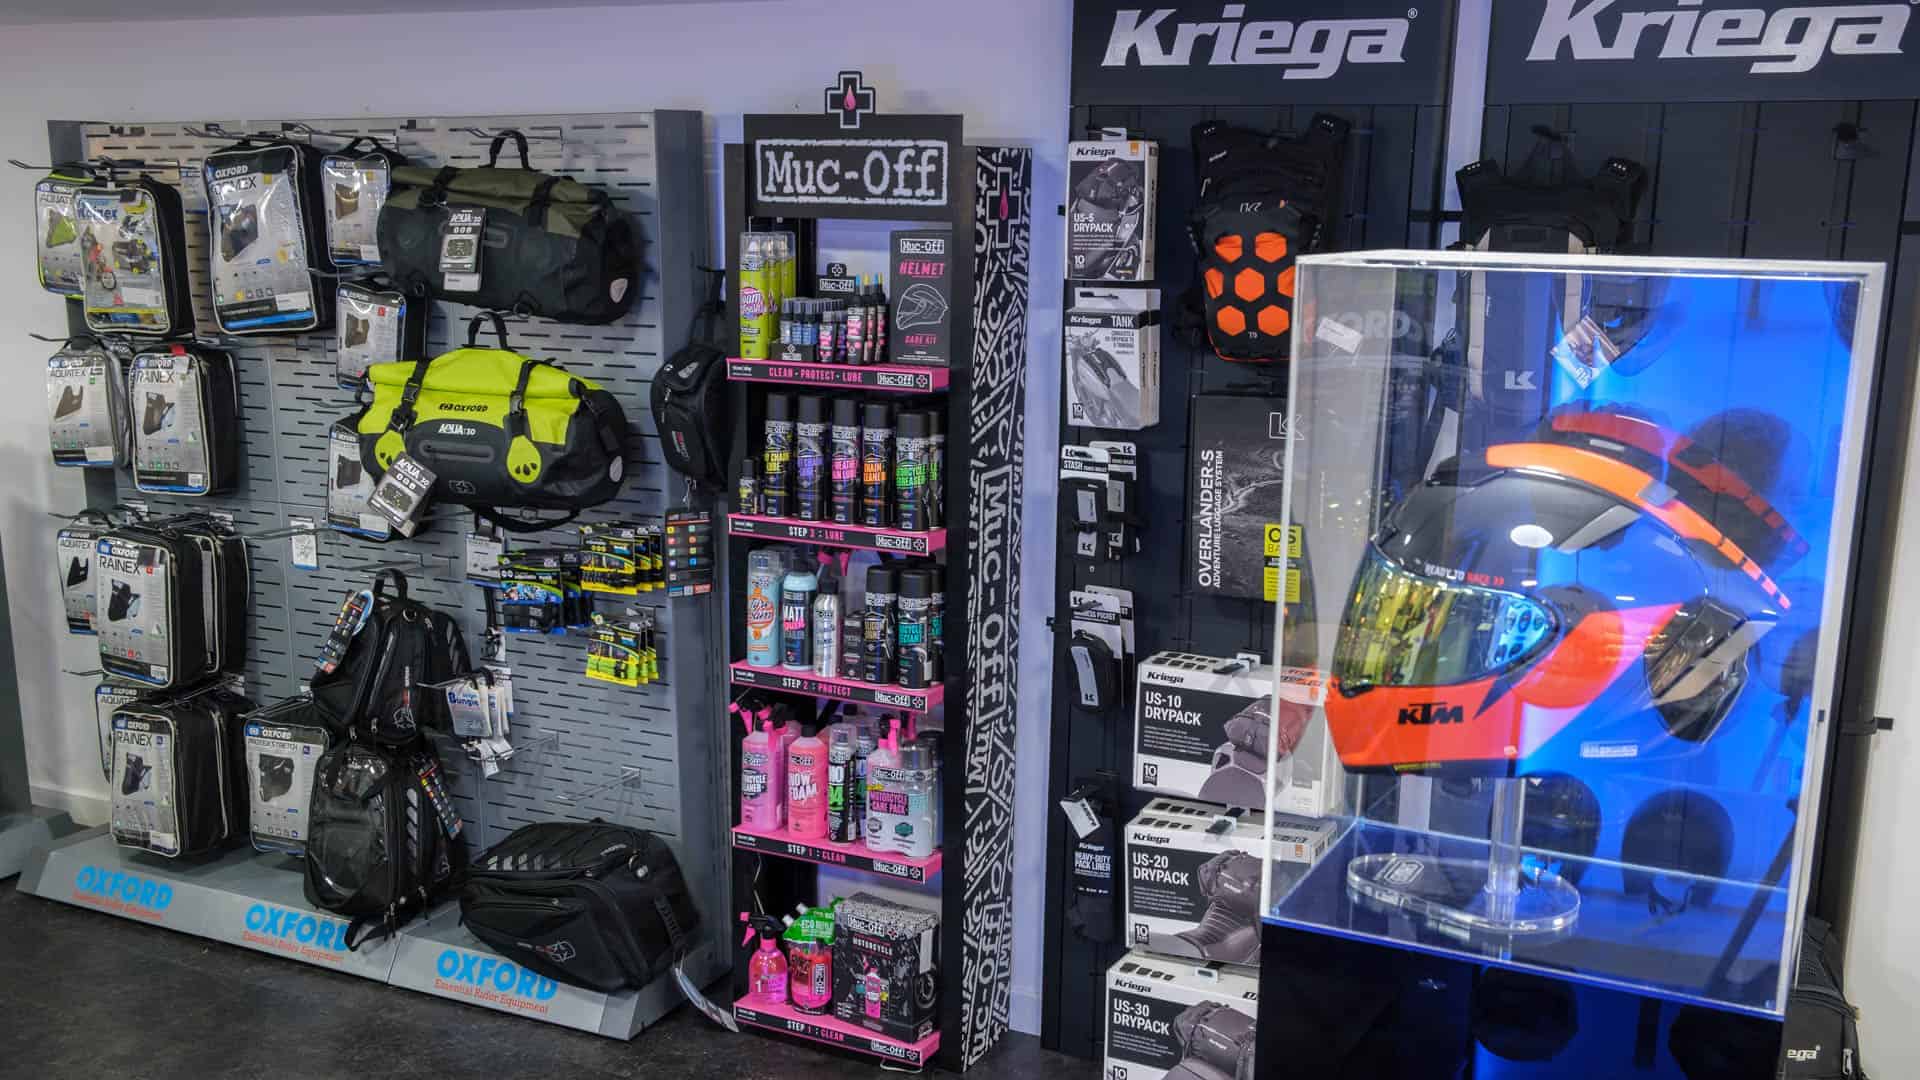 KTM helmet on display with muc-off products and motorcycle equipment